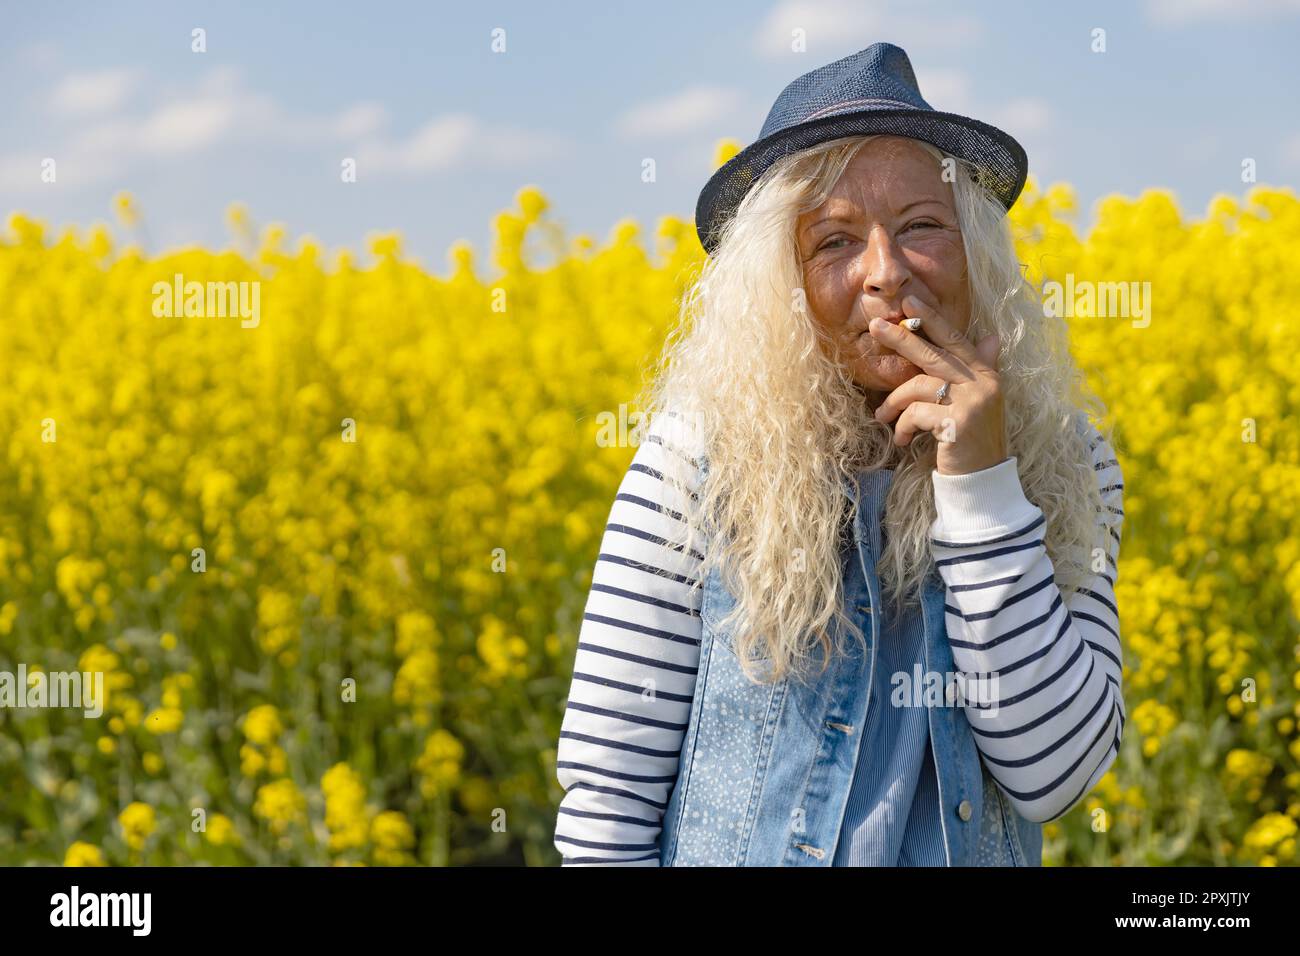 Elderly Woman smoke a cigarette in rape field with yellow blossums Stock Photo